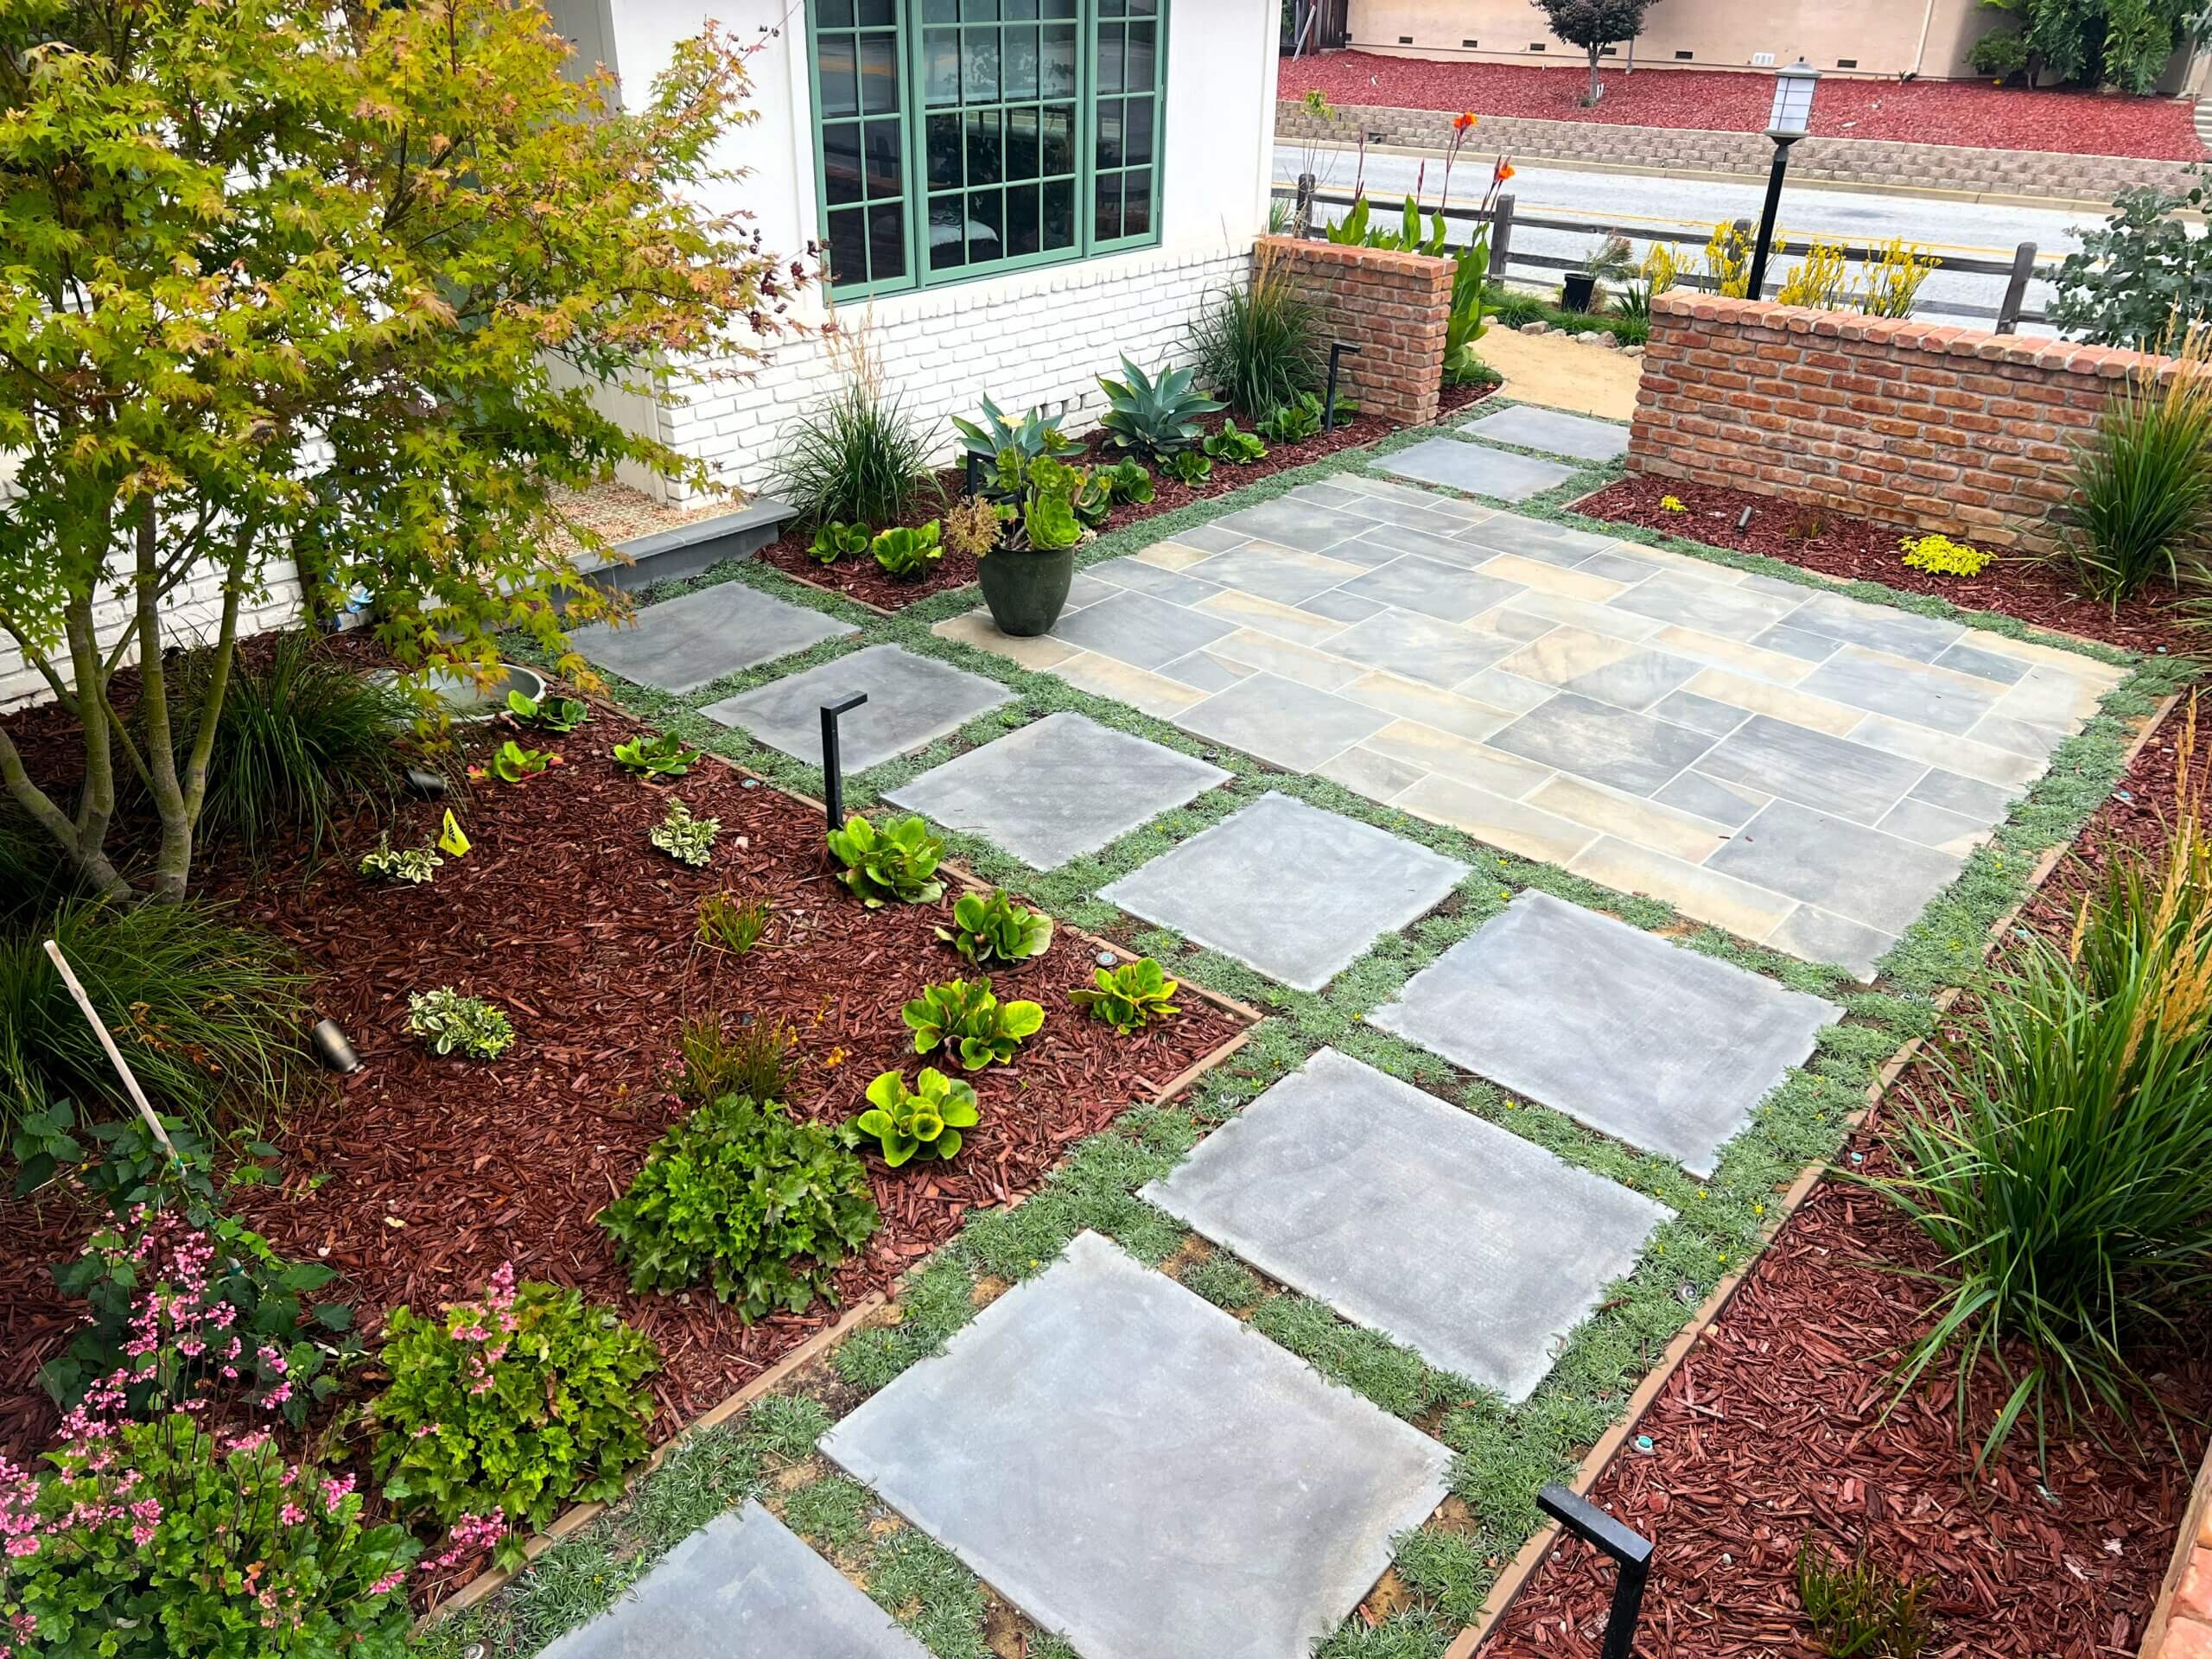 Flagstone patio in front yard entry courtyard with paver stepping stones and low ground cover plantings